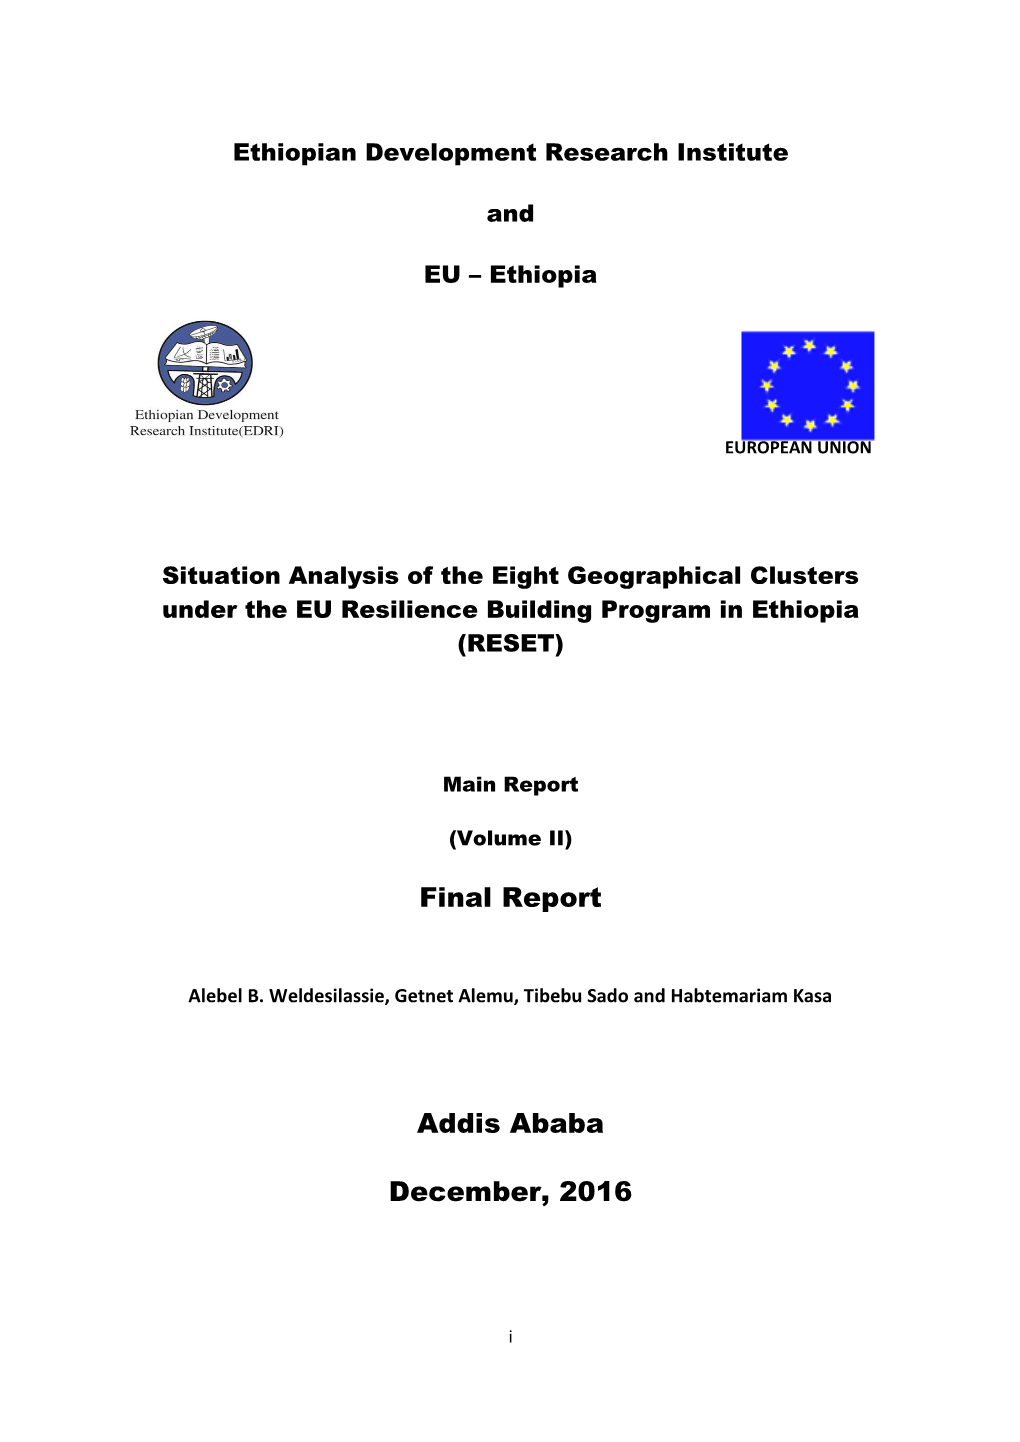 Final Report Addis Ababa December, 2016